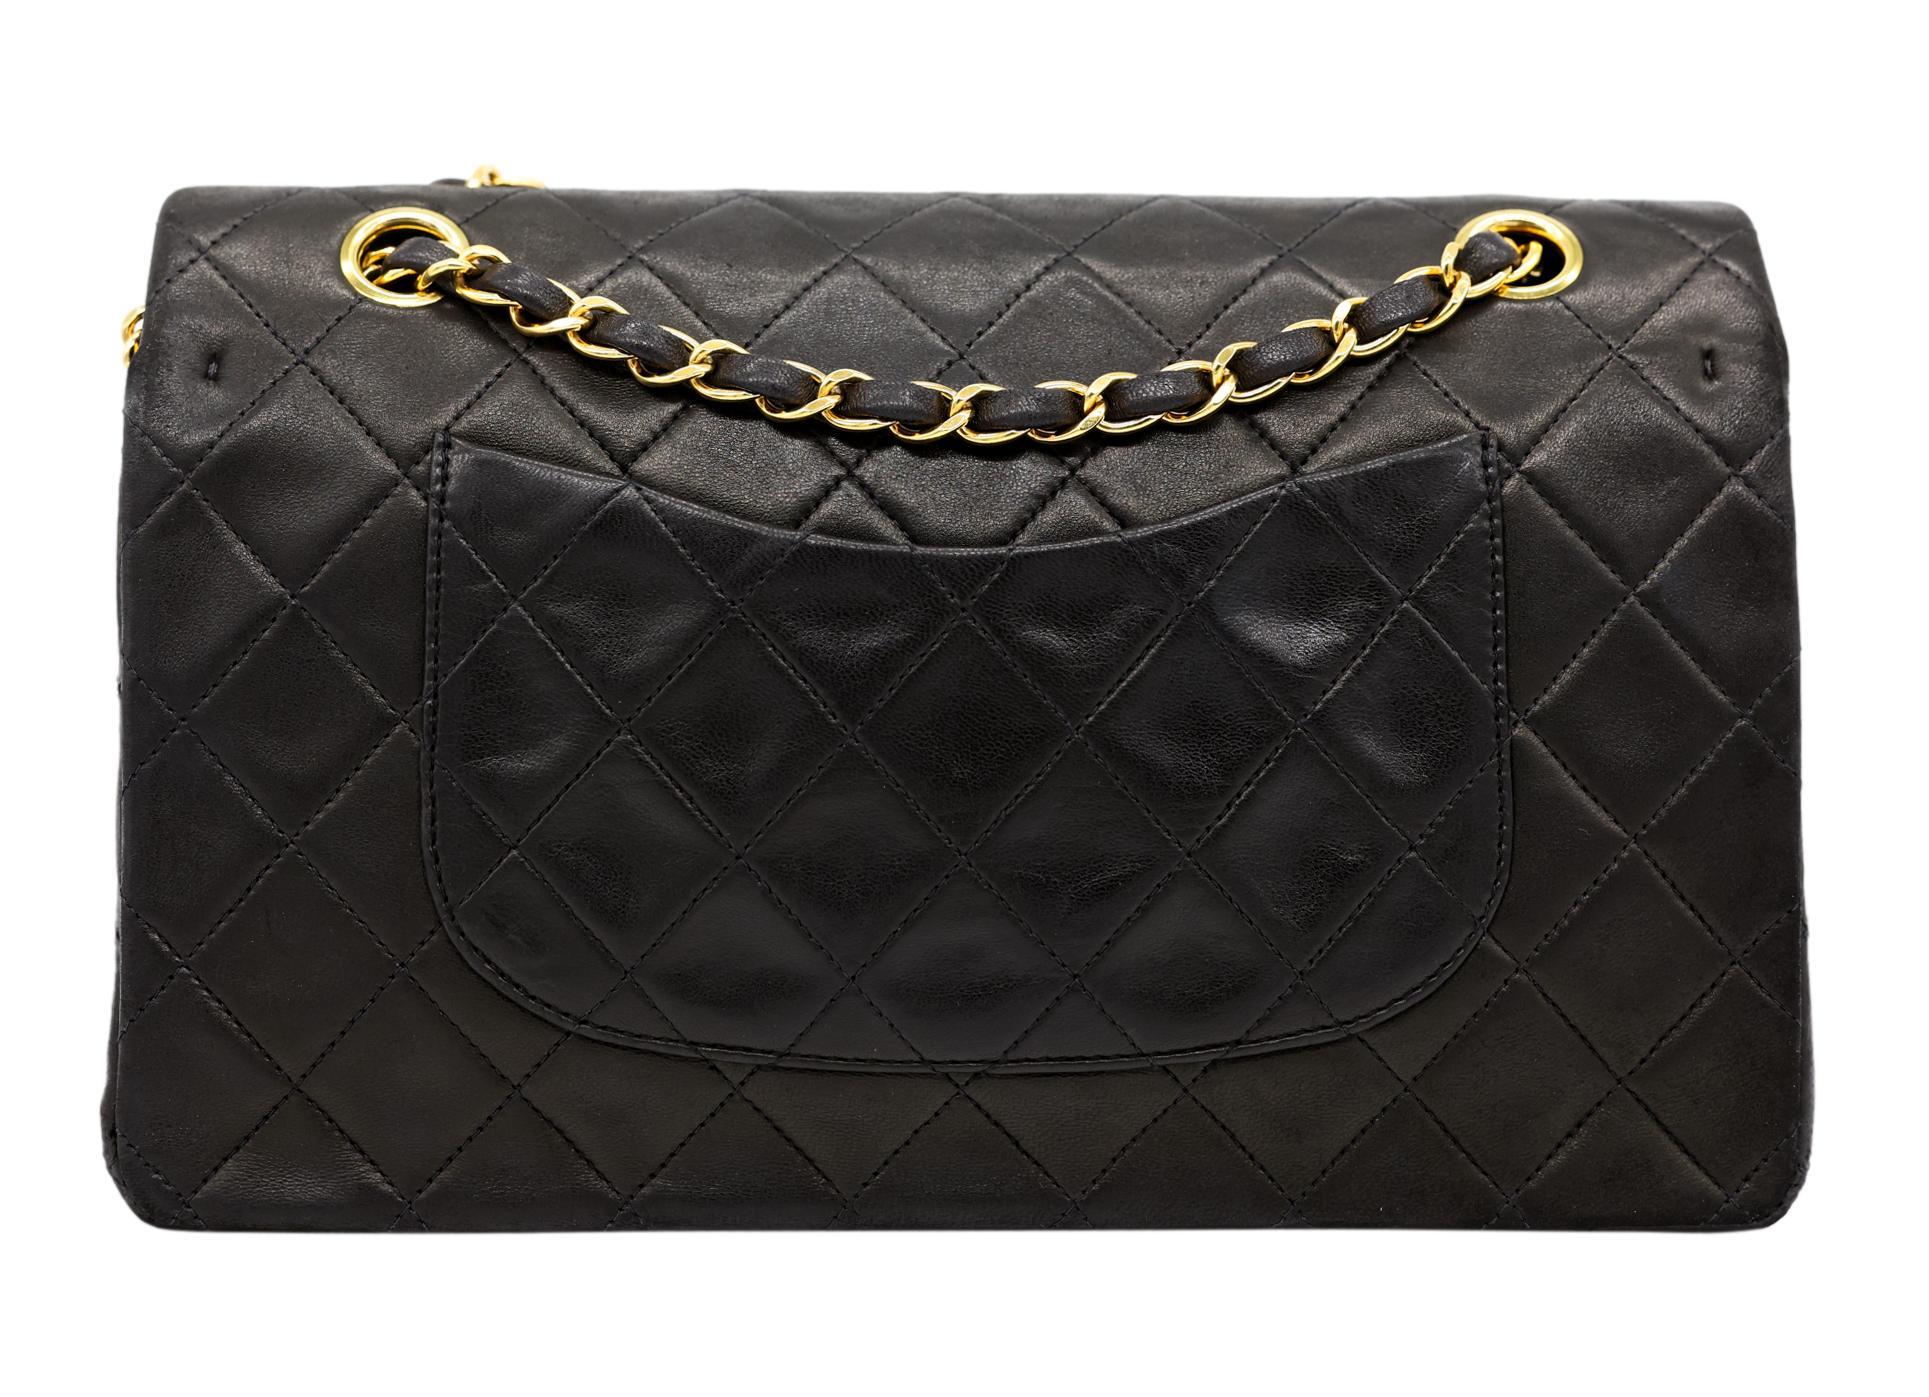 Chanel Timeless Black Medium Double Flap Quilted Lambskin Shoulder Bag, 2019. 2